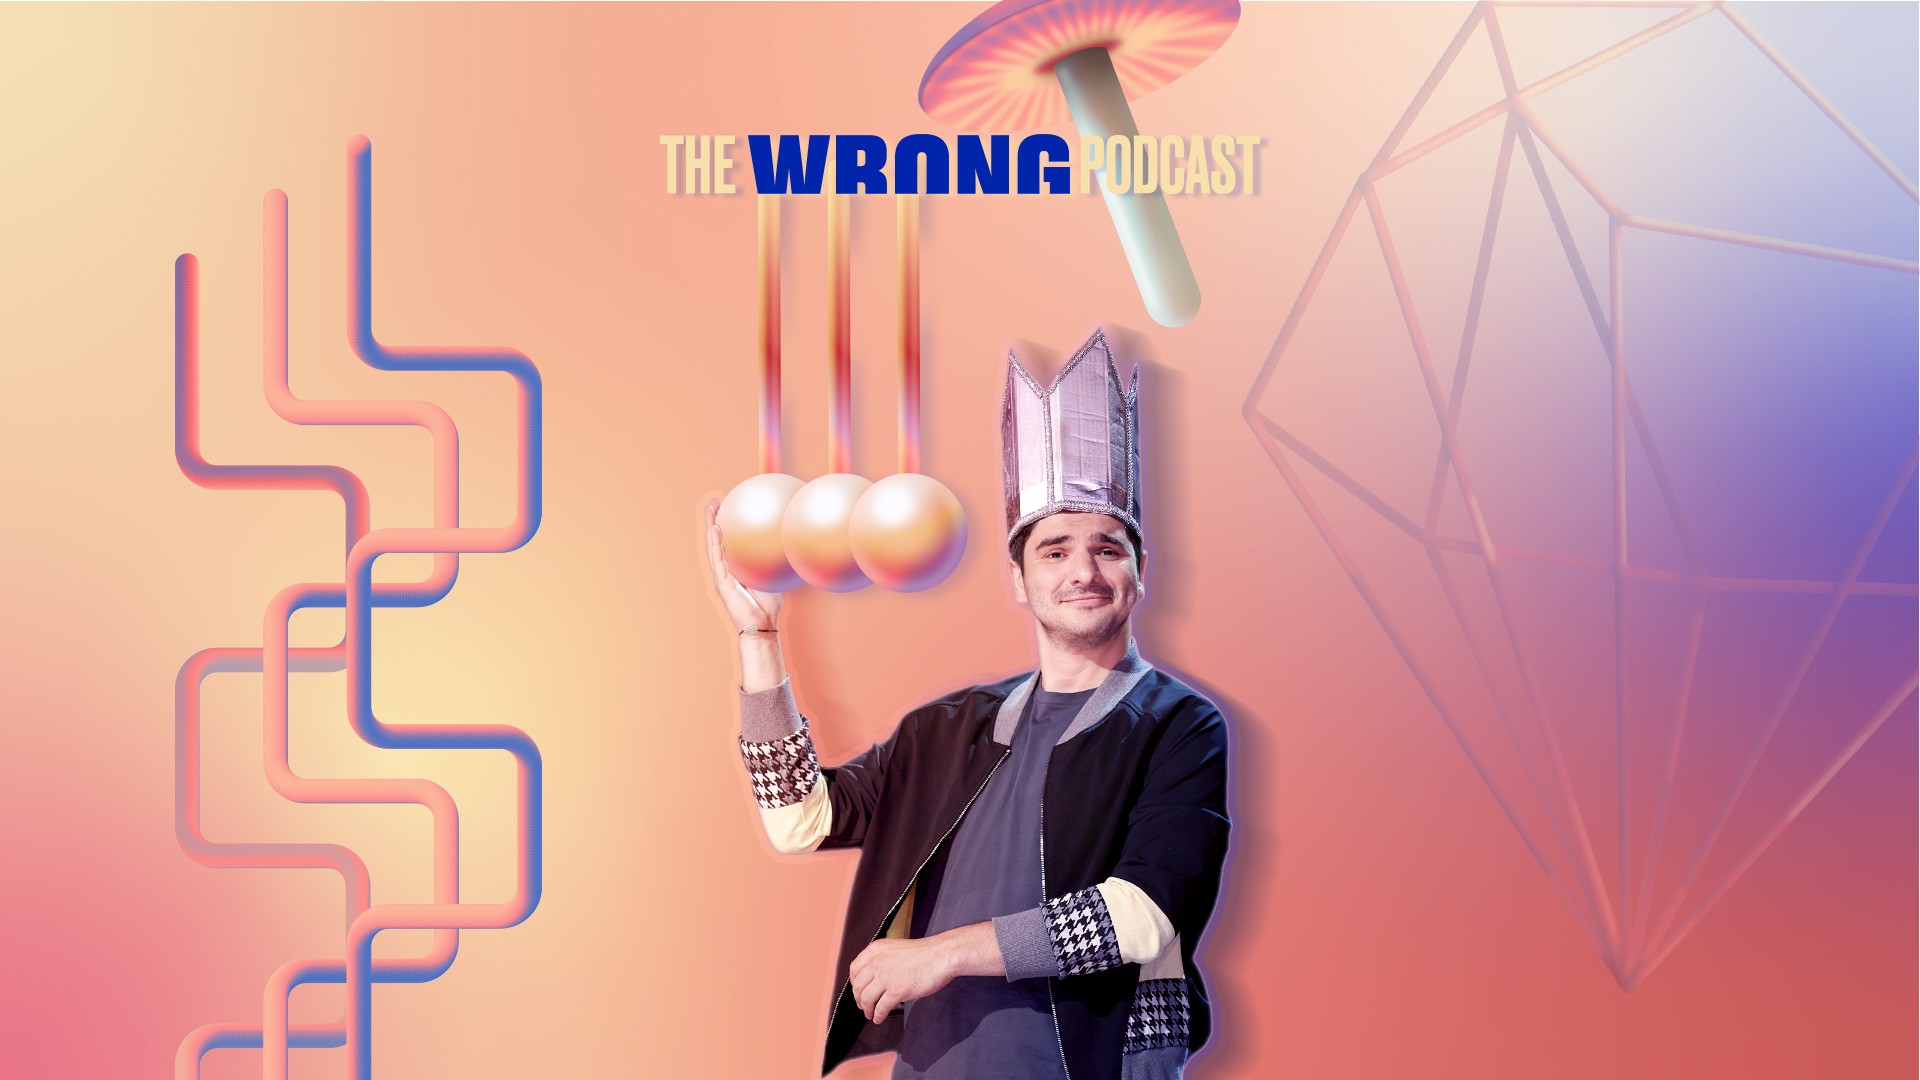 The Wrong Podcast